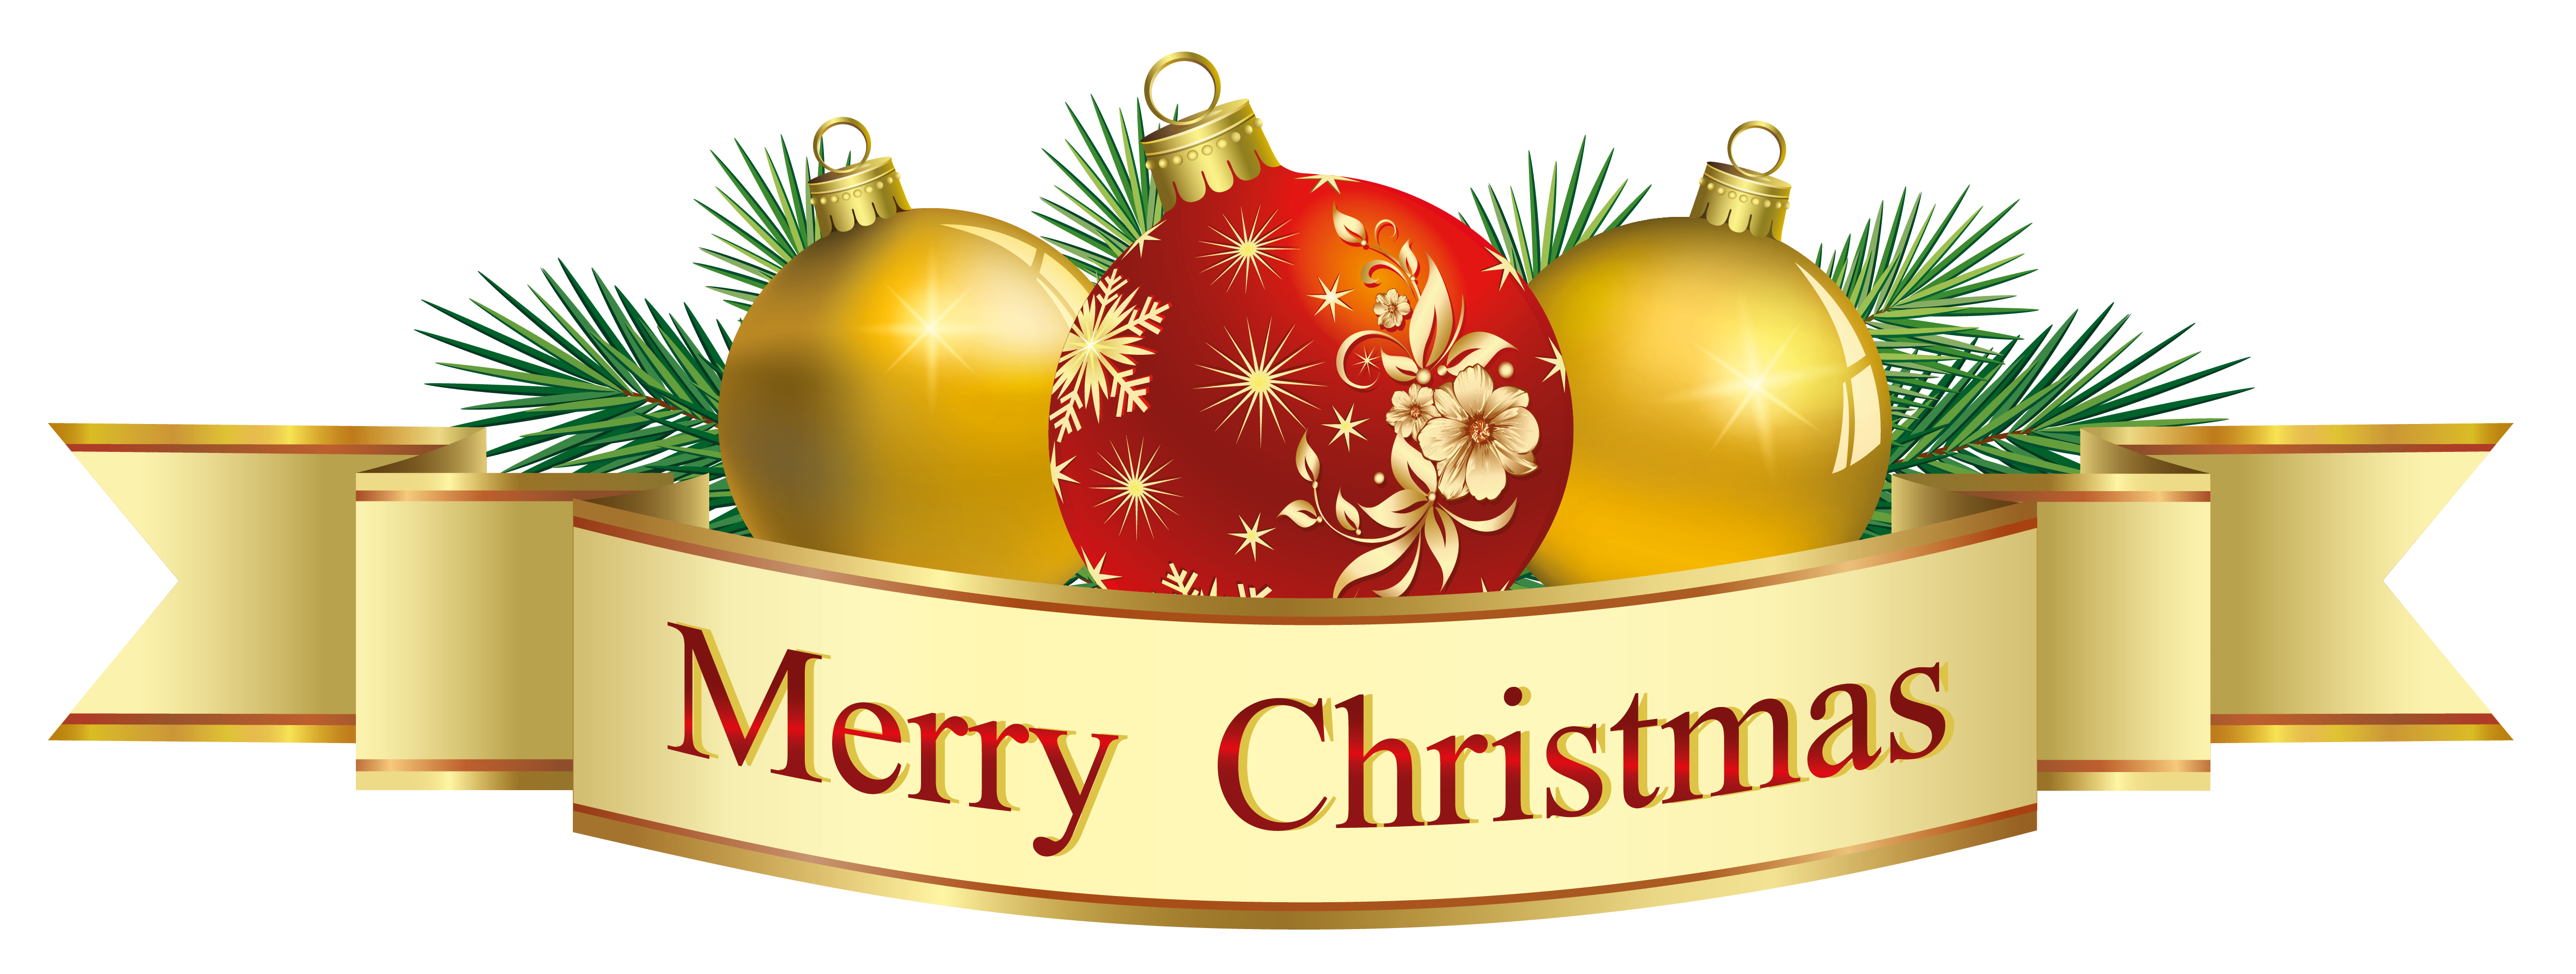 Free Merry Christmas Transparent, Download Free Merry Christmas ...